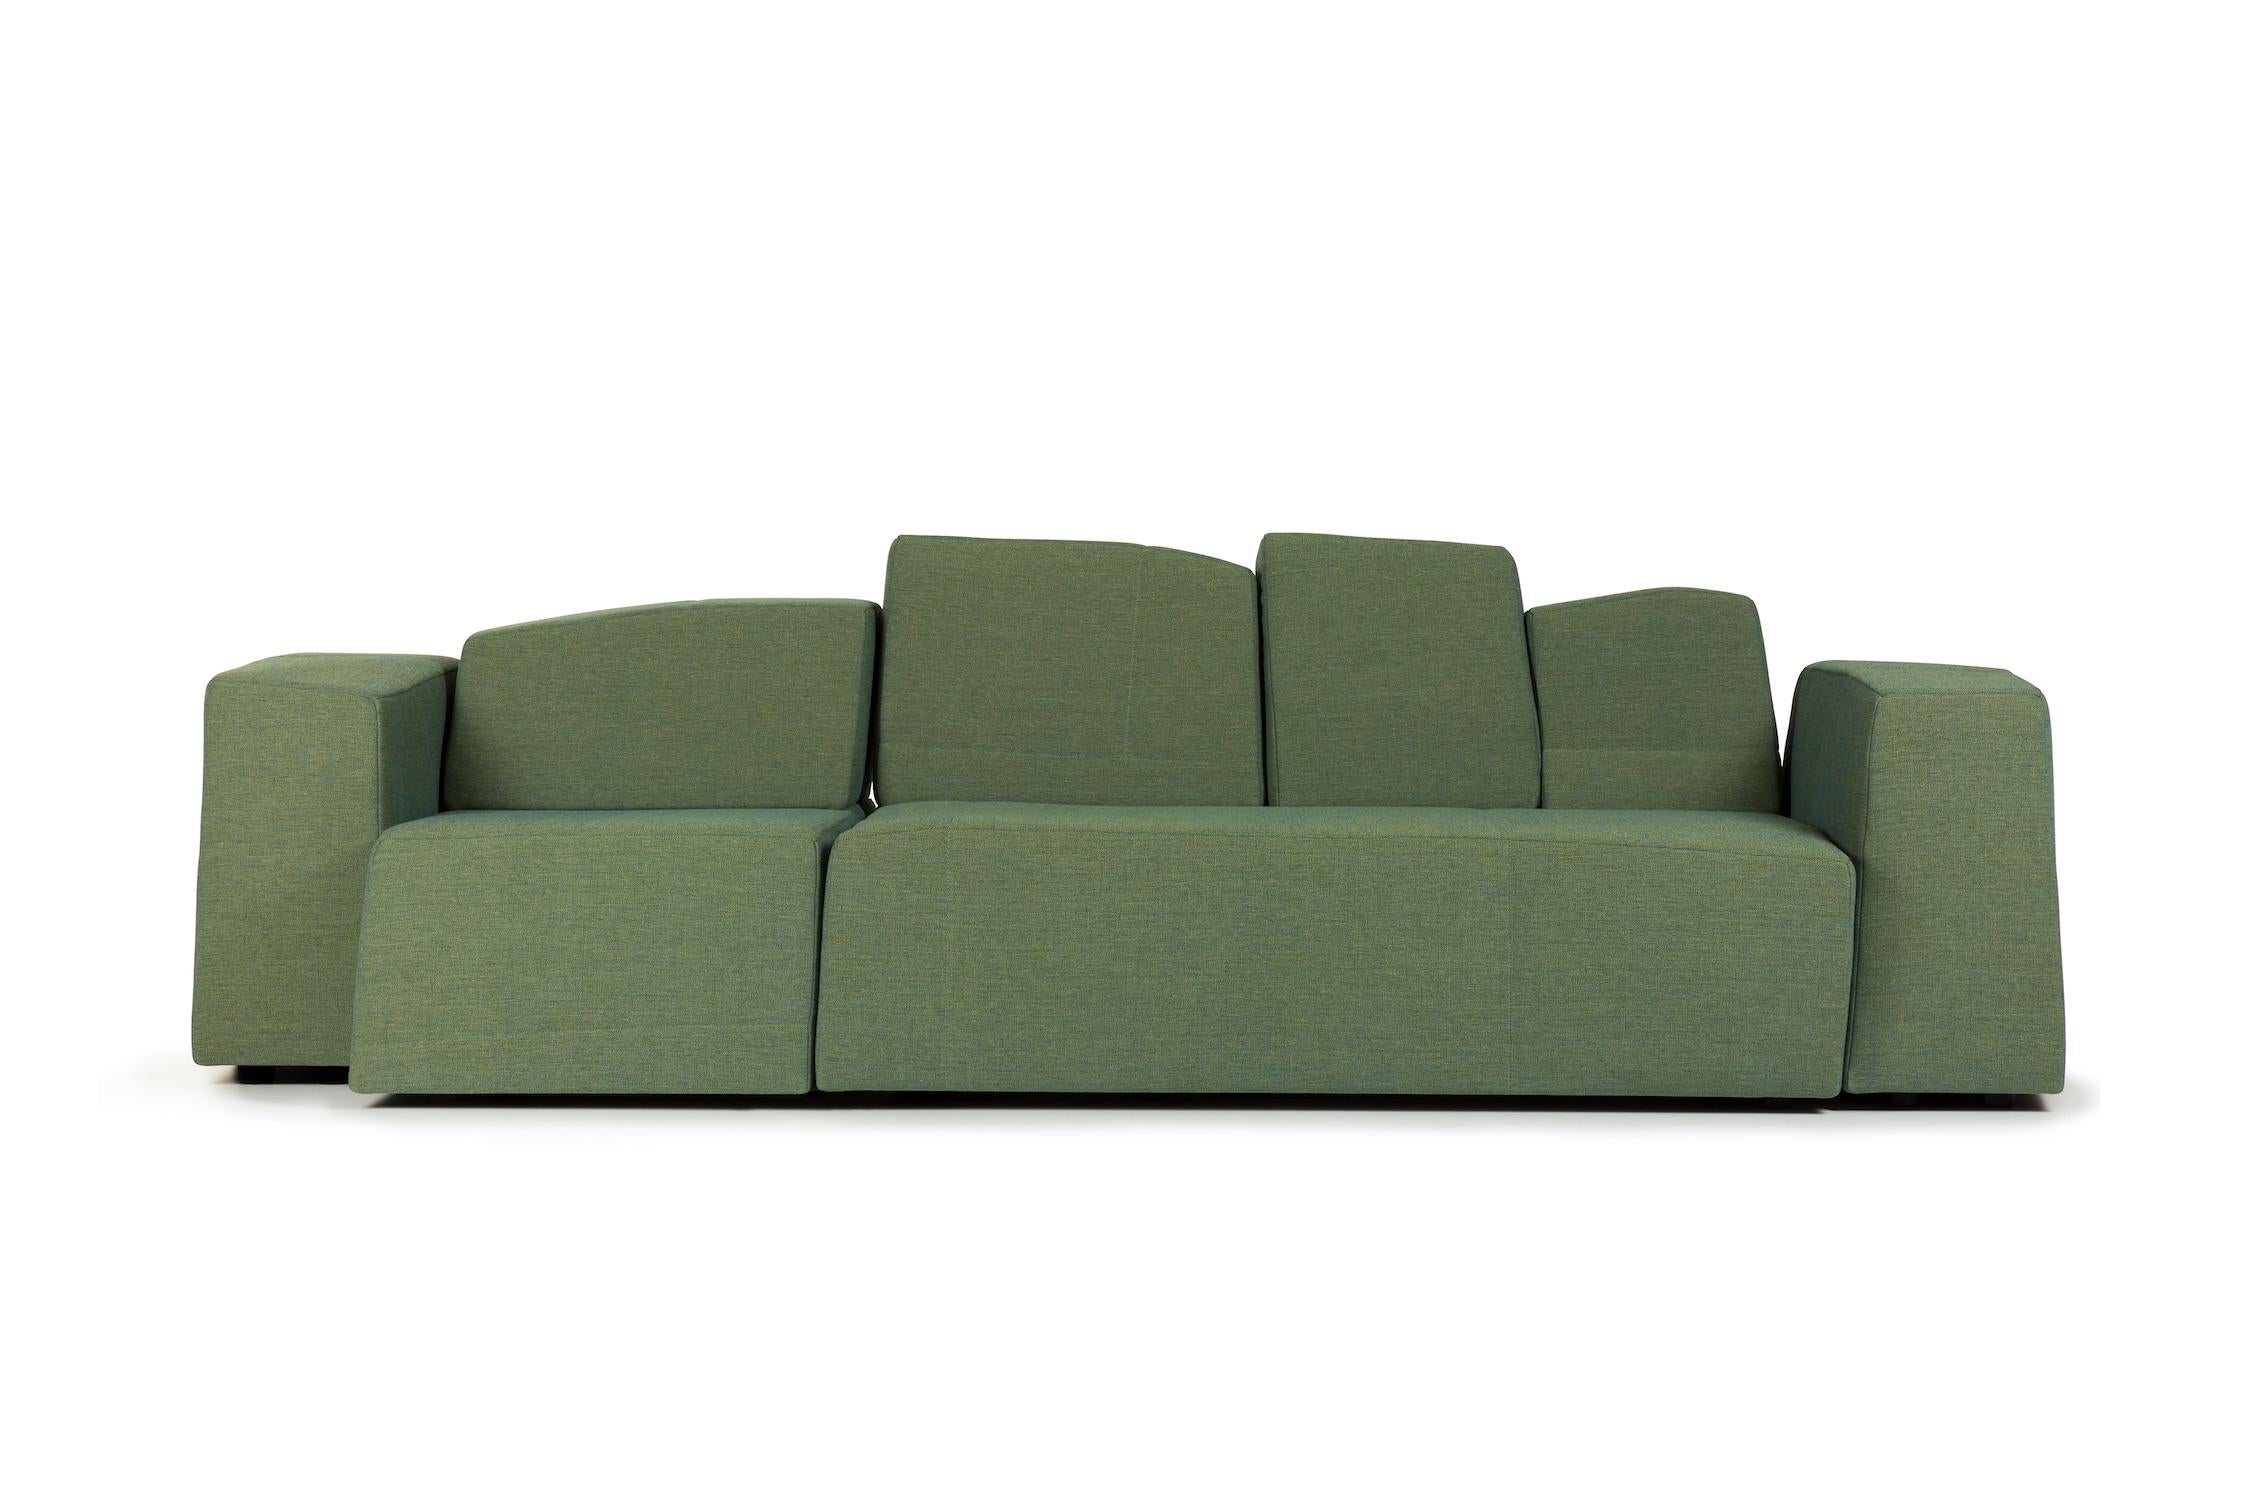 Modern Something Like This Modular Sofa by Maarten Baas in Fabric or Leather For Sale